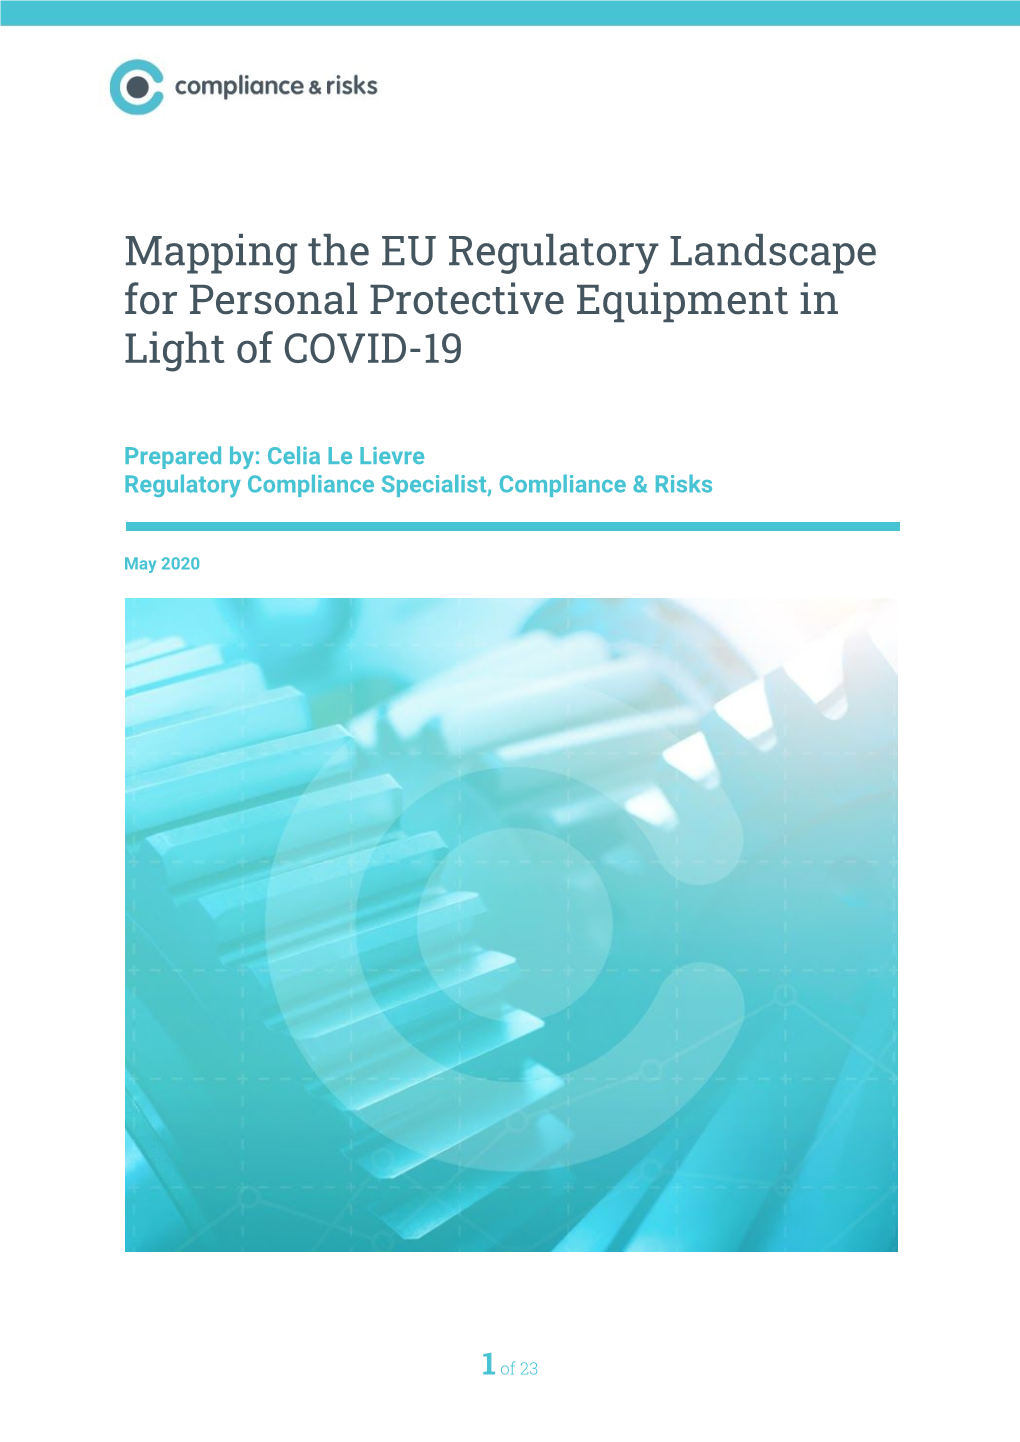 Mapping the EU Regulatory Landscape for Personal Protective Equipment in Light of COVID-19